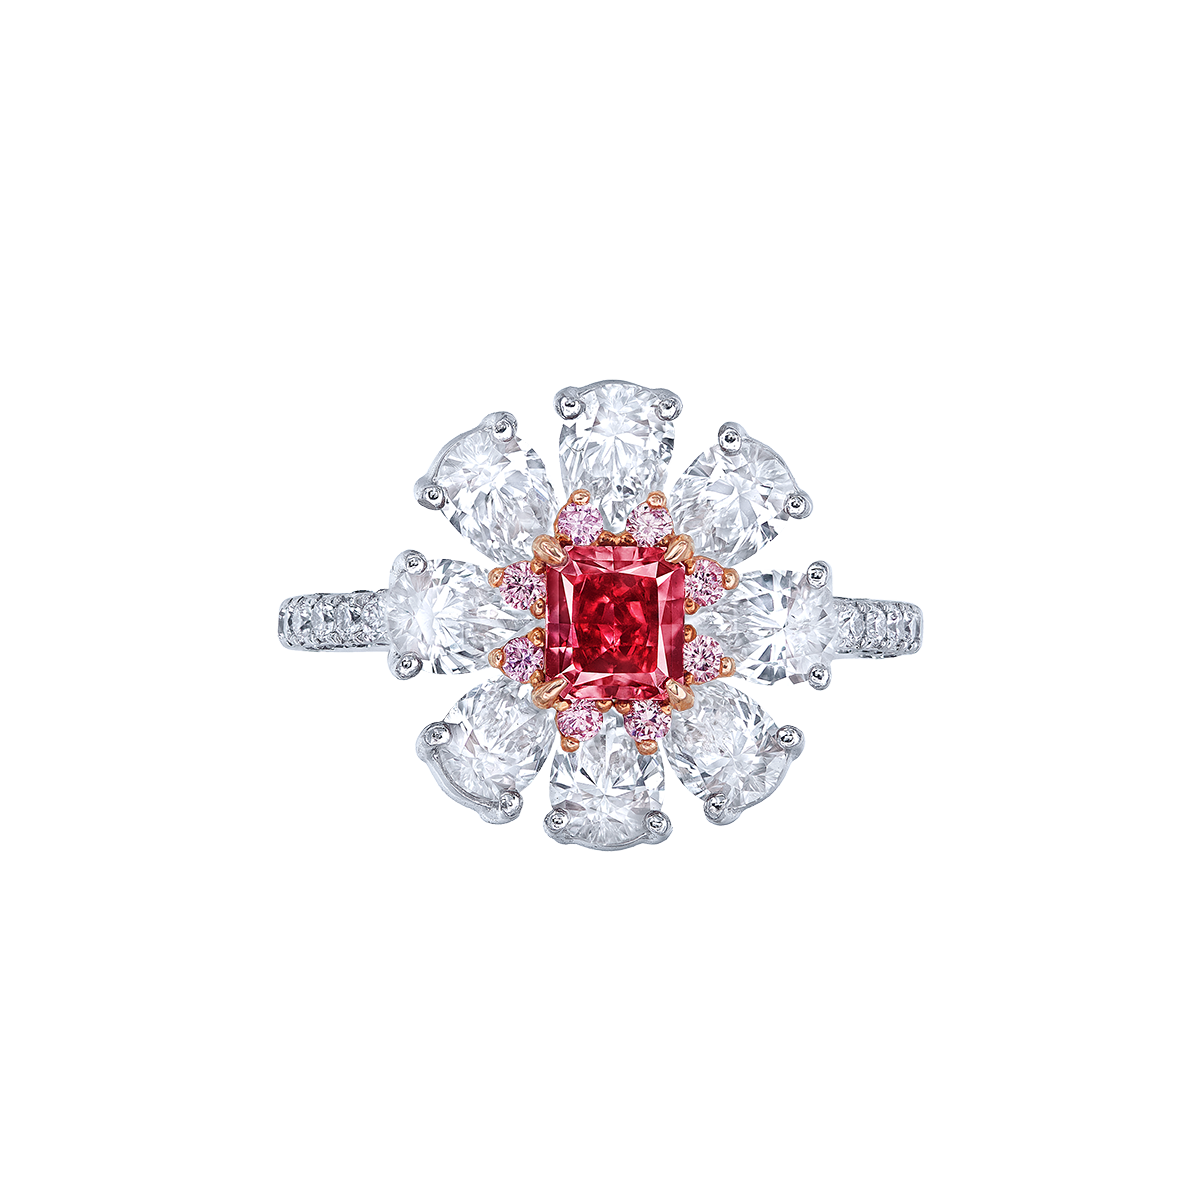 GIA 0.53克拉 紅鑽鑽戒
Fancy Red Colored Diamond and Diamond Ring